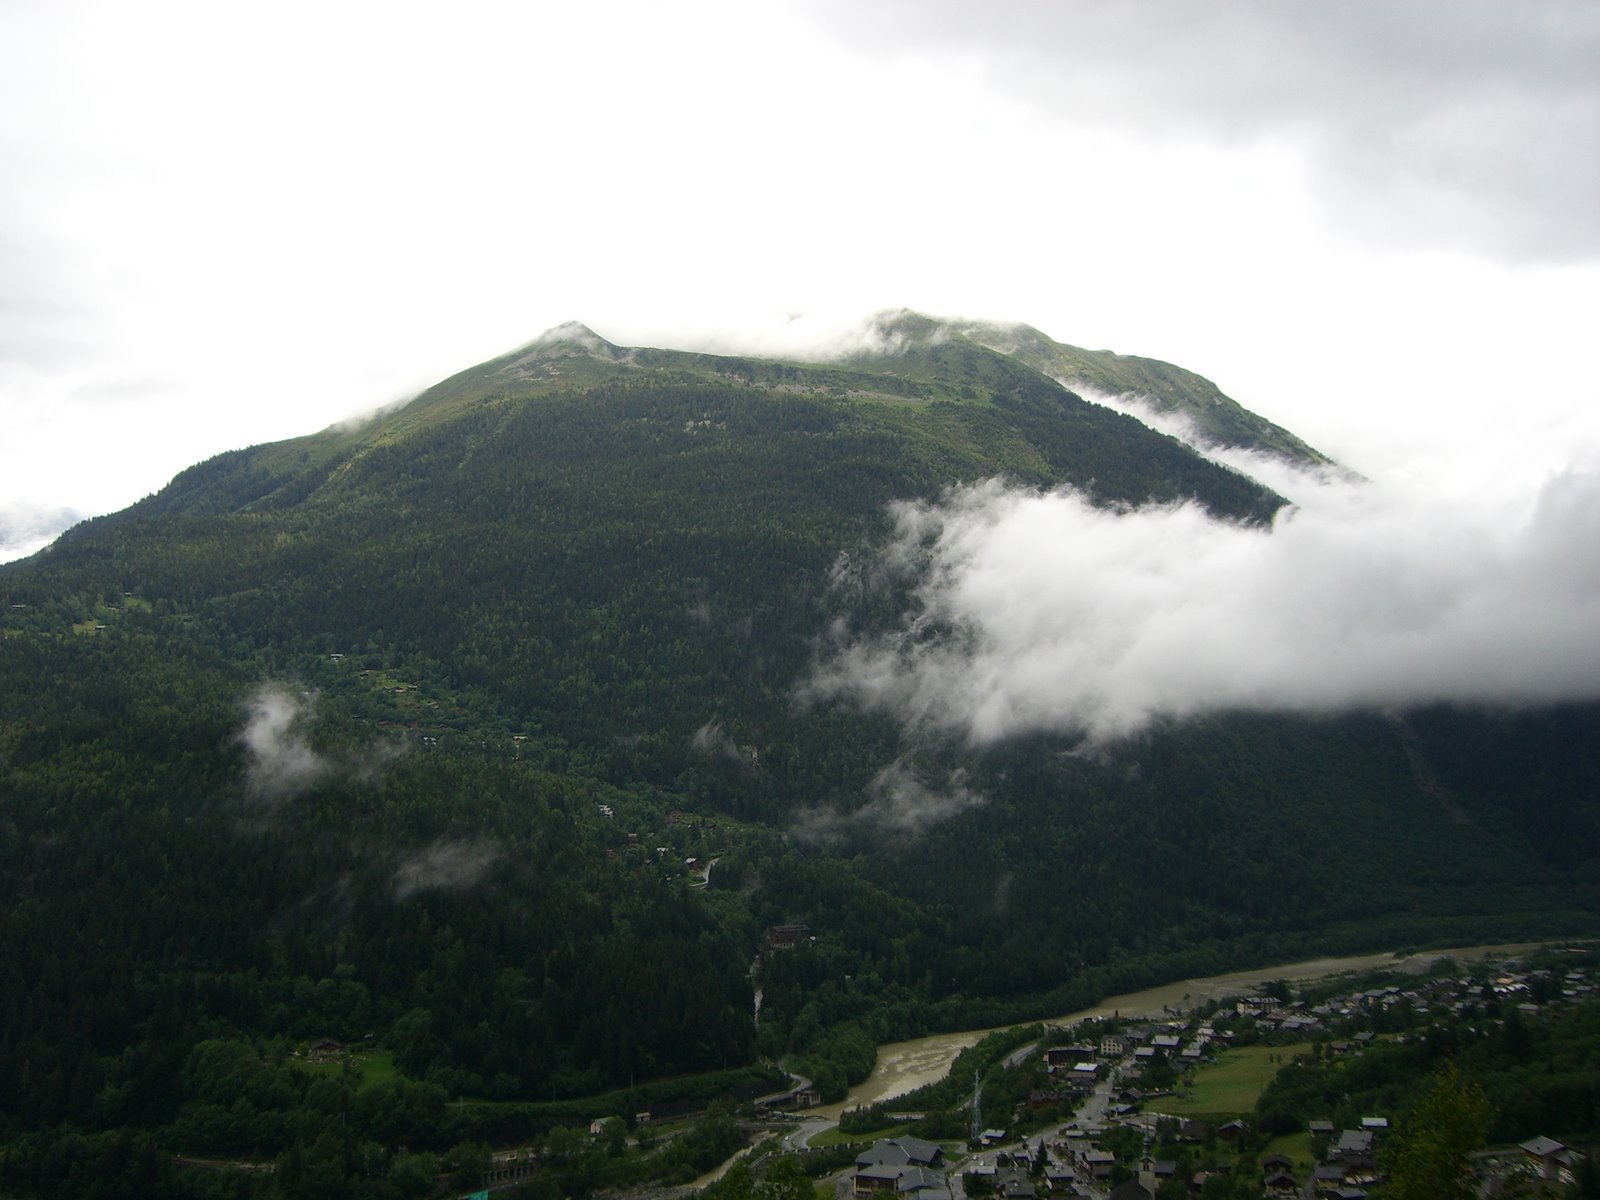 [storm-clearing-over-aiguillette-des-houches.jpg]